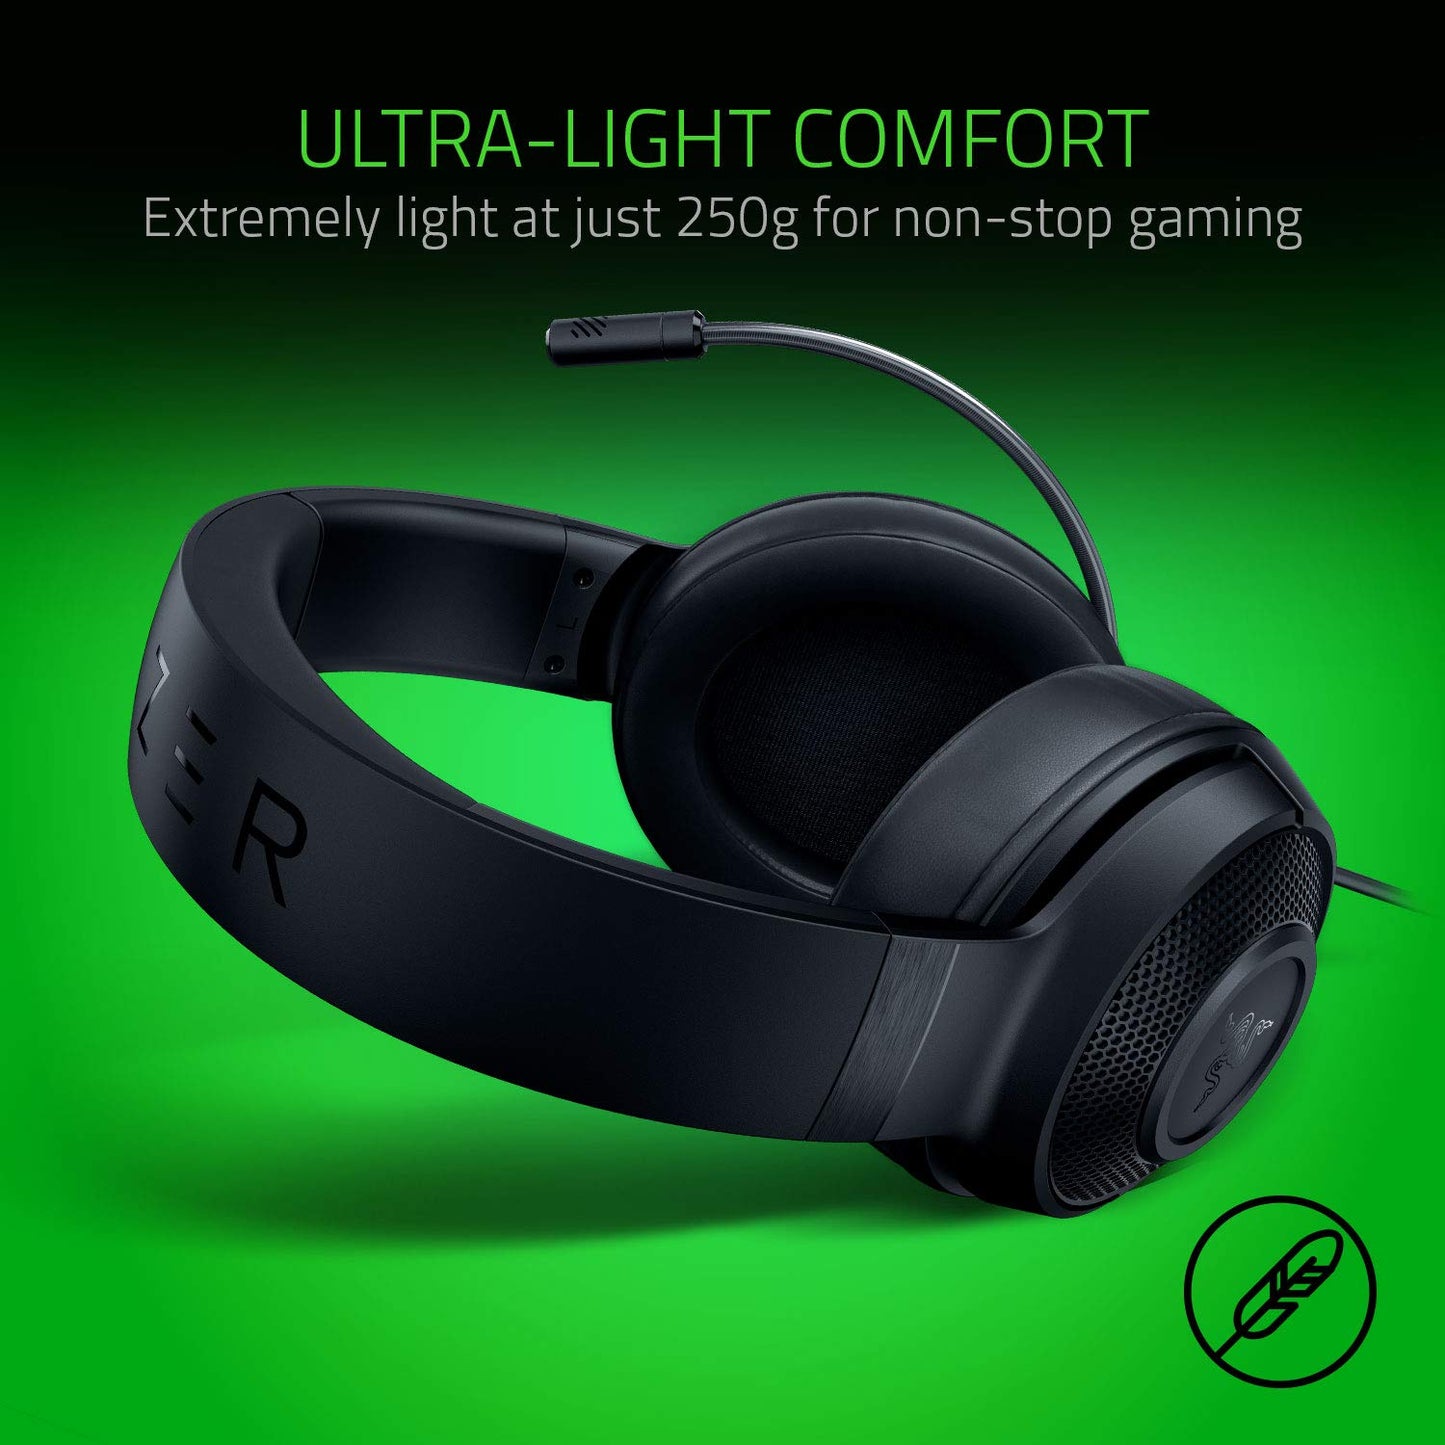 Razer Kraken X Ultralight Gaming Headset: 7.1 Surround Sound - Lightweight Aluminum Frame - Bendable Cardioid Microphone - PC, PS4, PS5, Switch, Xbox One, Xbox Series X & S, Mobile - Black